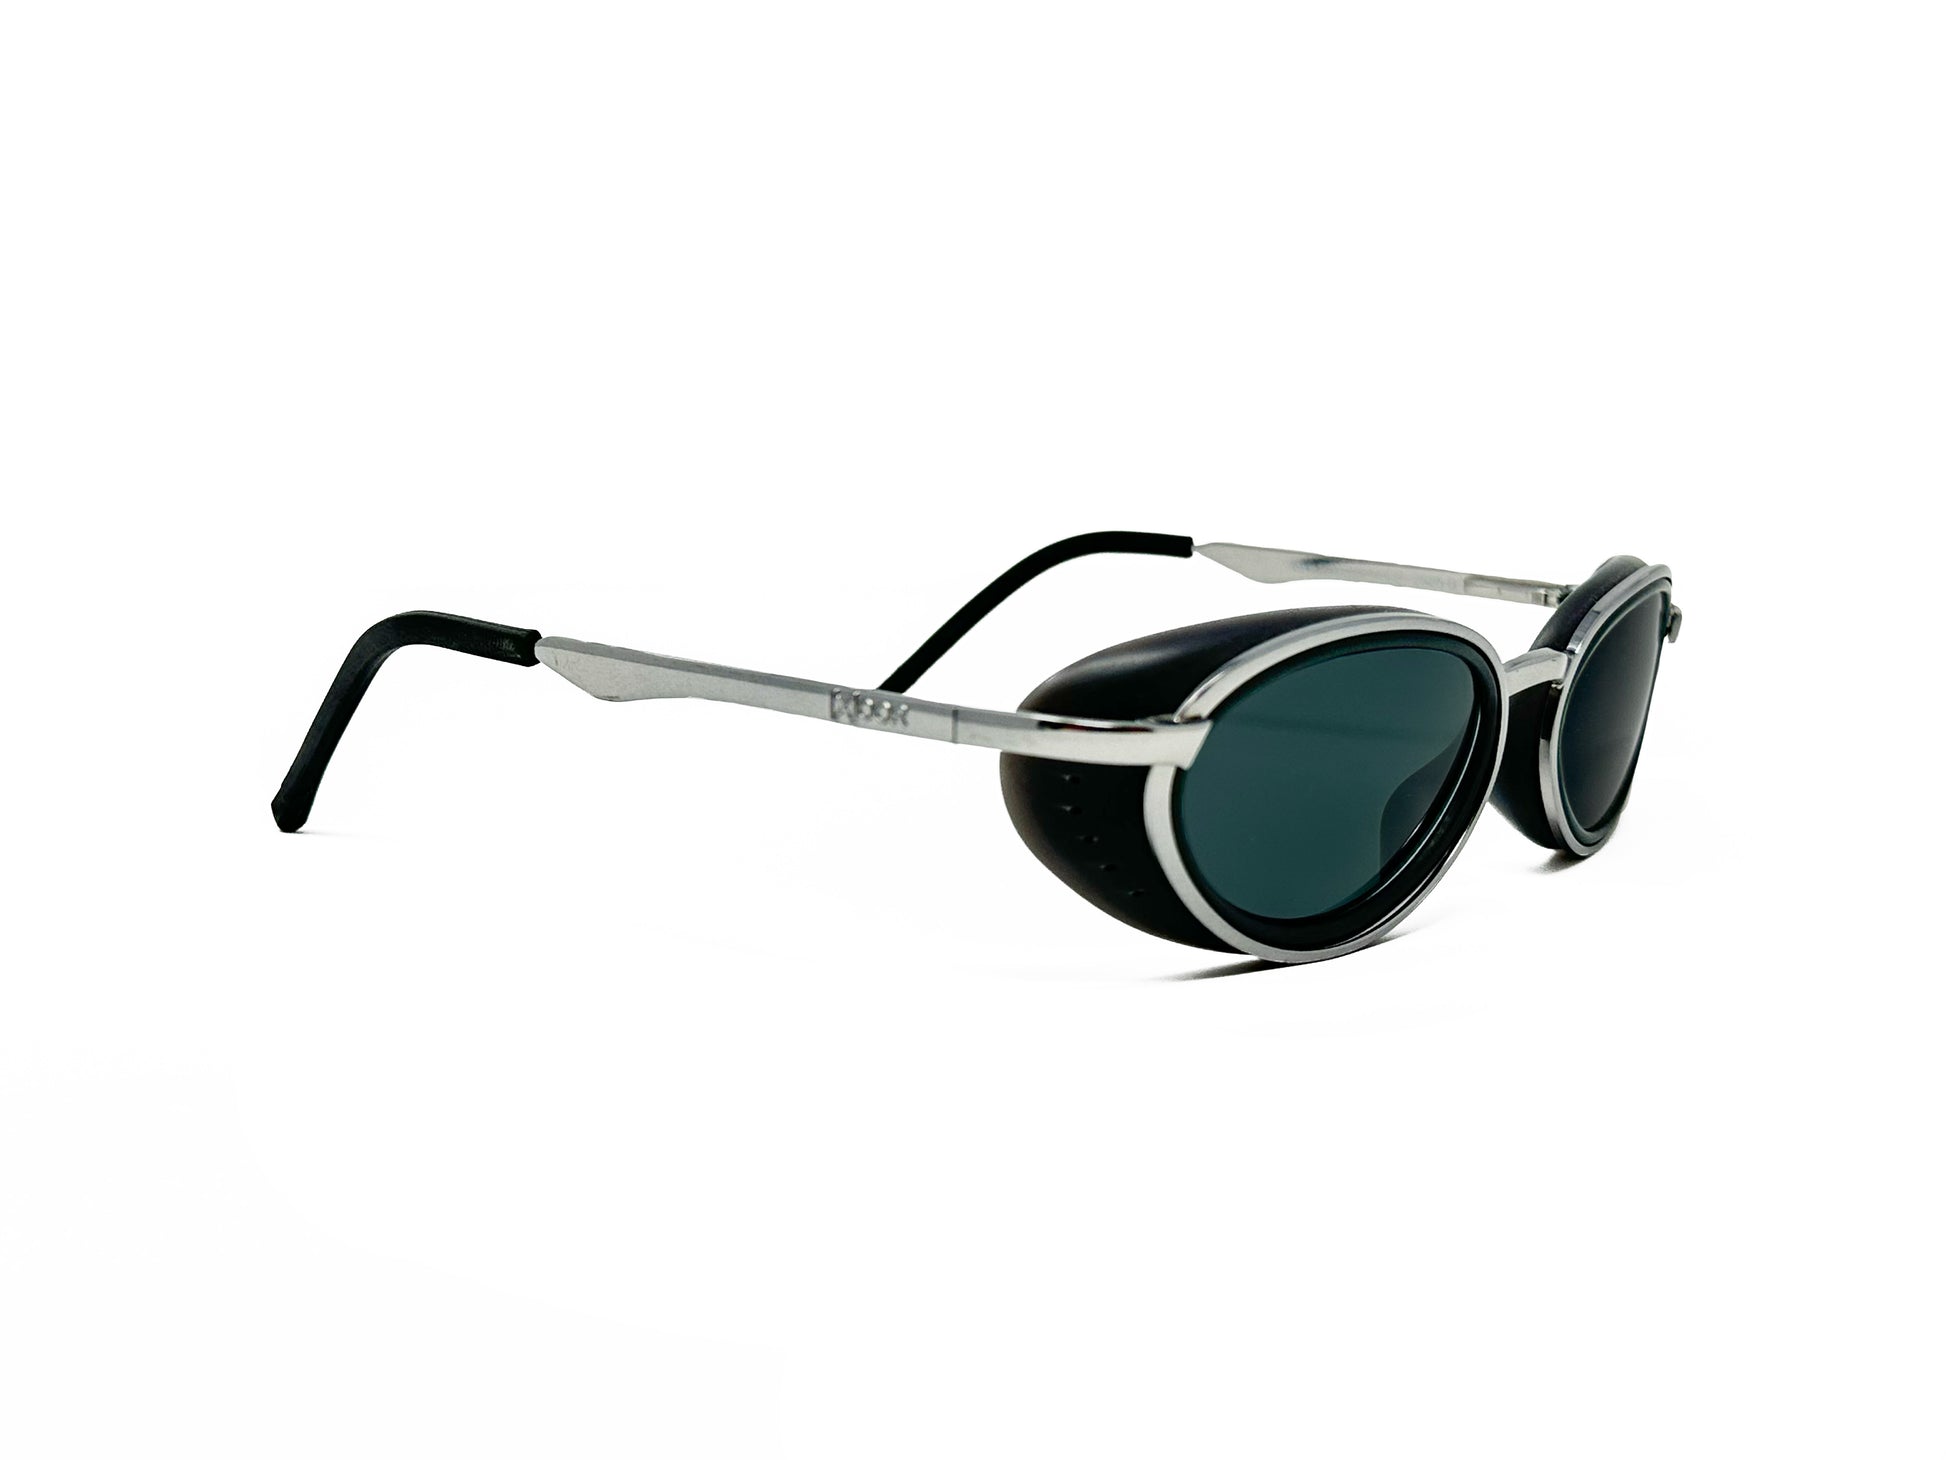 [X]OOR upward-angled, oval, metal, polarized sunglass. Model: 2925. Color: B - Silver with grey lenses. Side view.